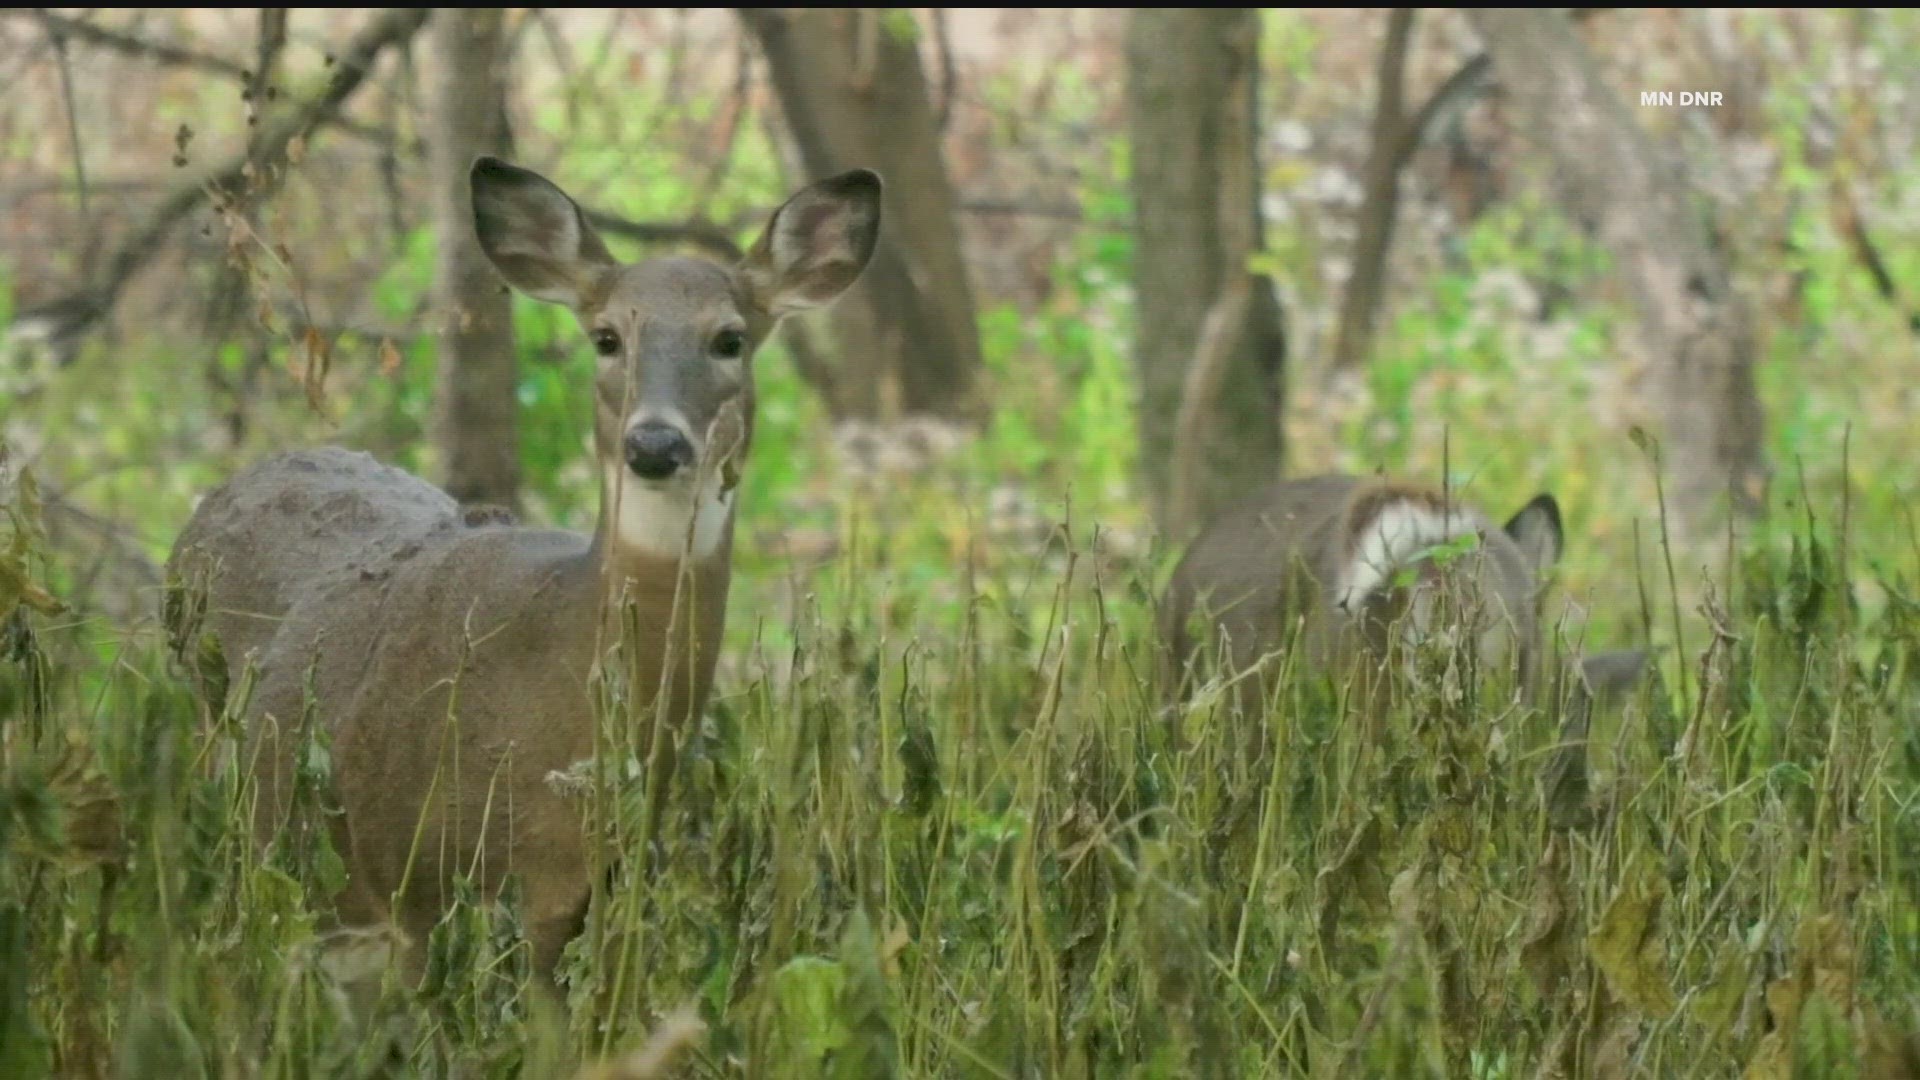 The DNR is asking deer hunters to become volunteer researchers by providing information about the animals they see during their hunts.